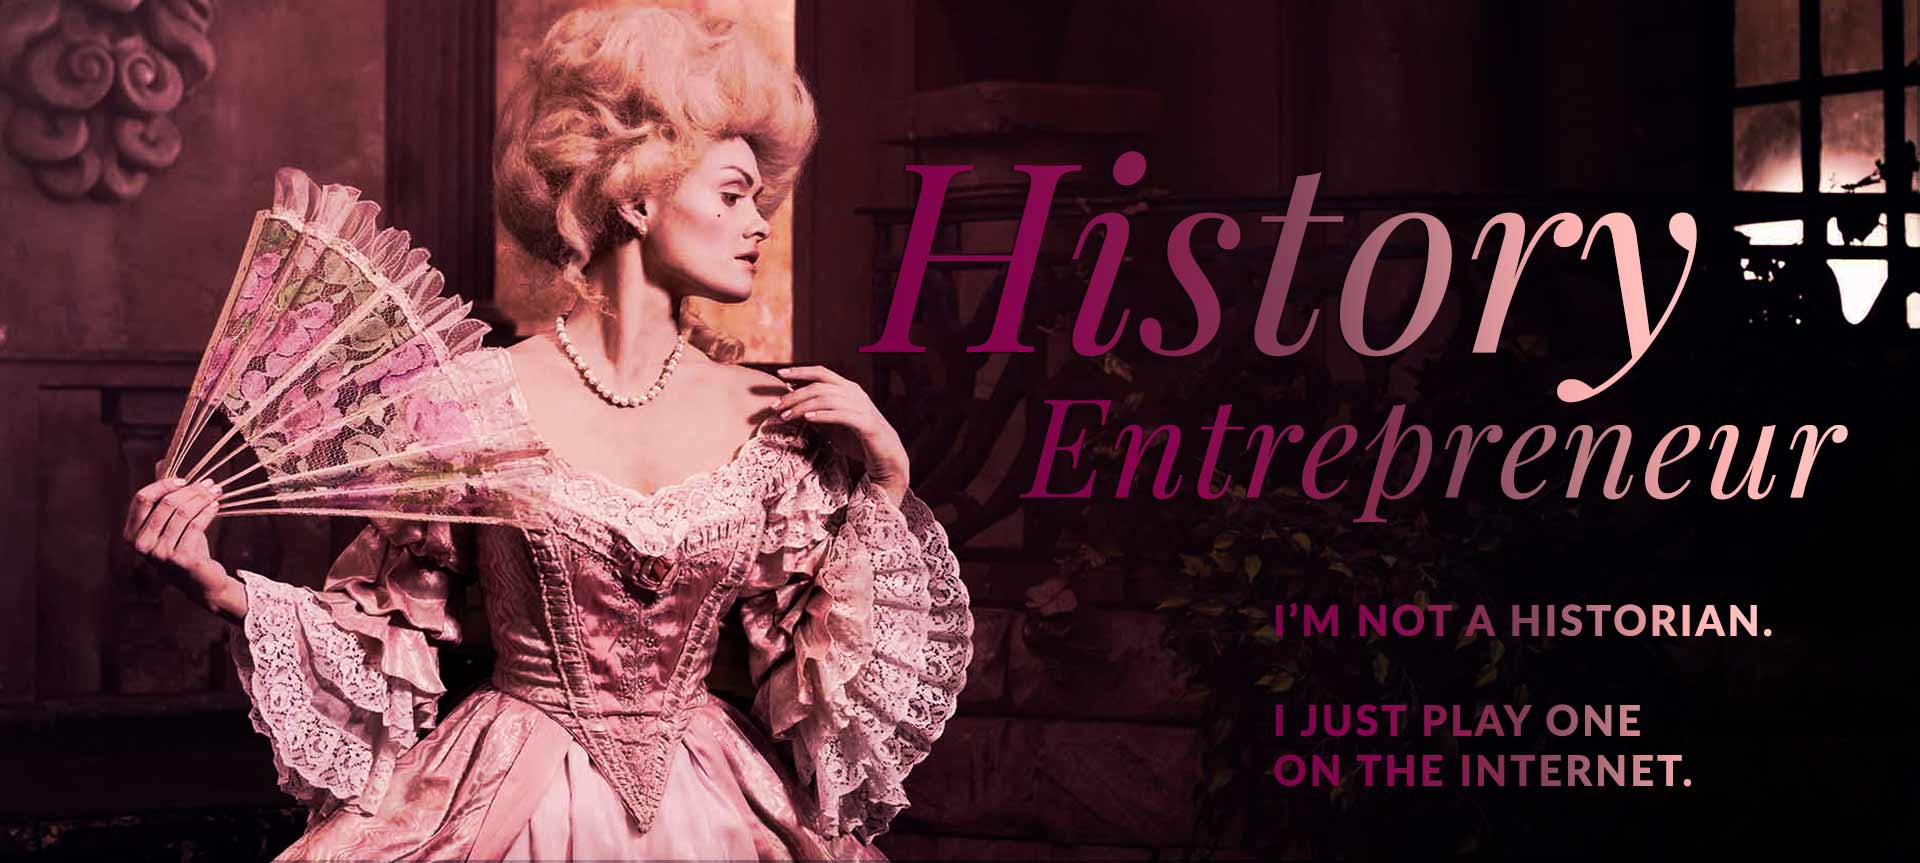 History Entrepreneur: I'm not a historian. I just play one on the internet.